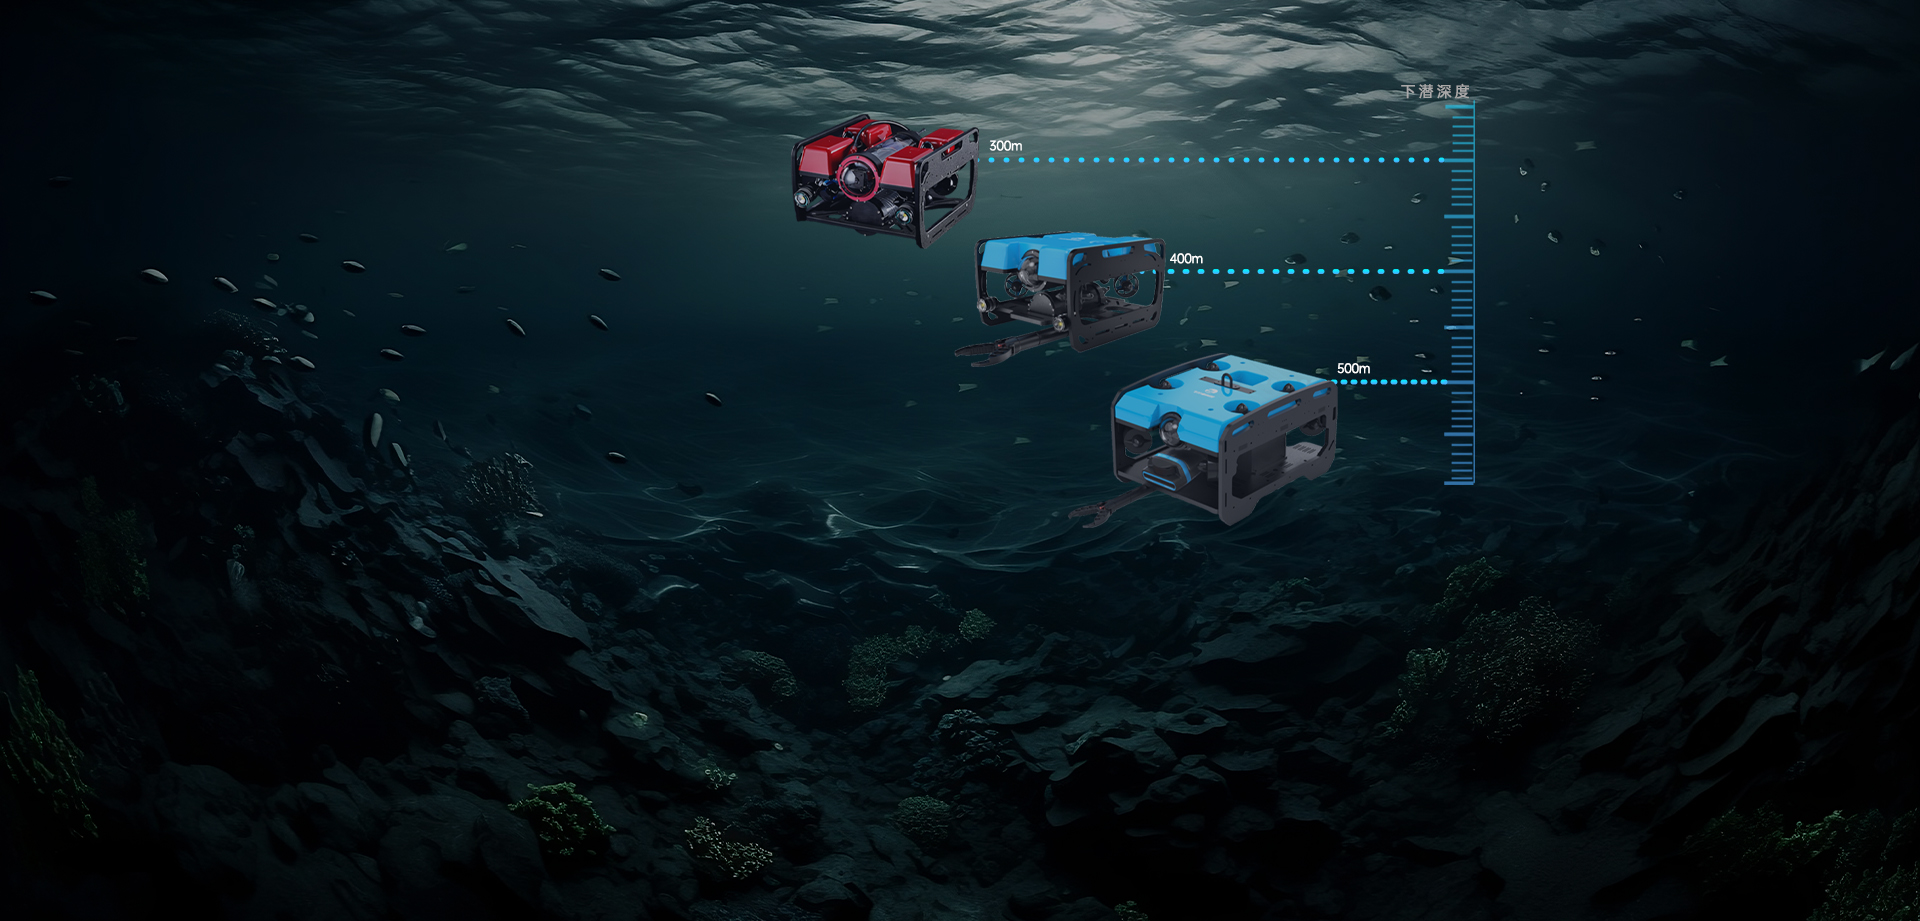 Brave the deep sea challenge  the uncharted limits